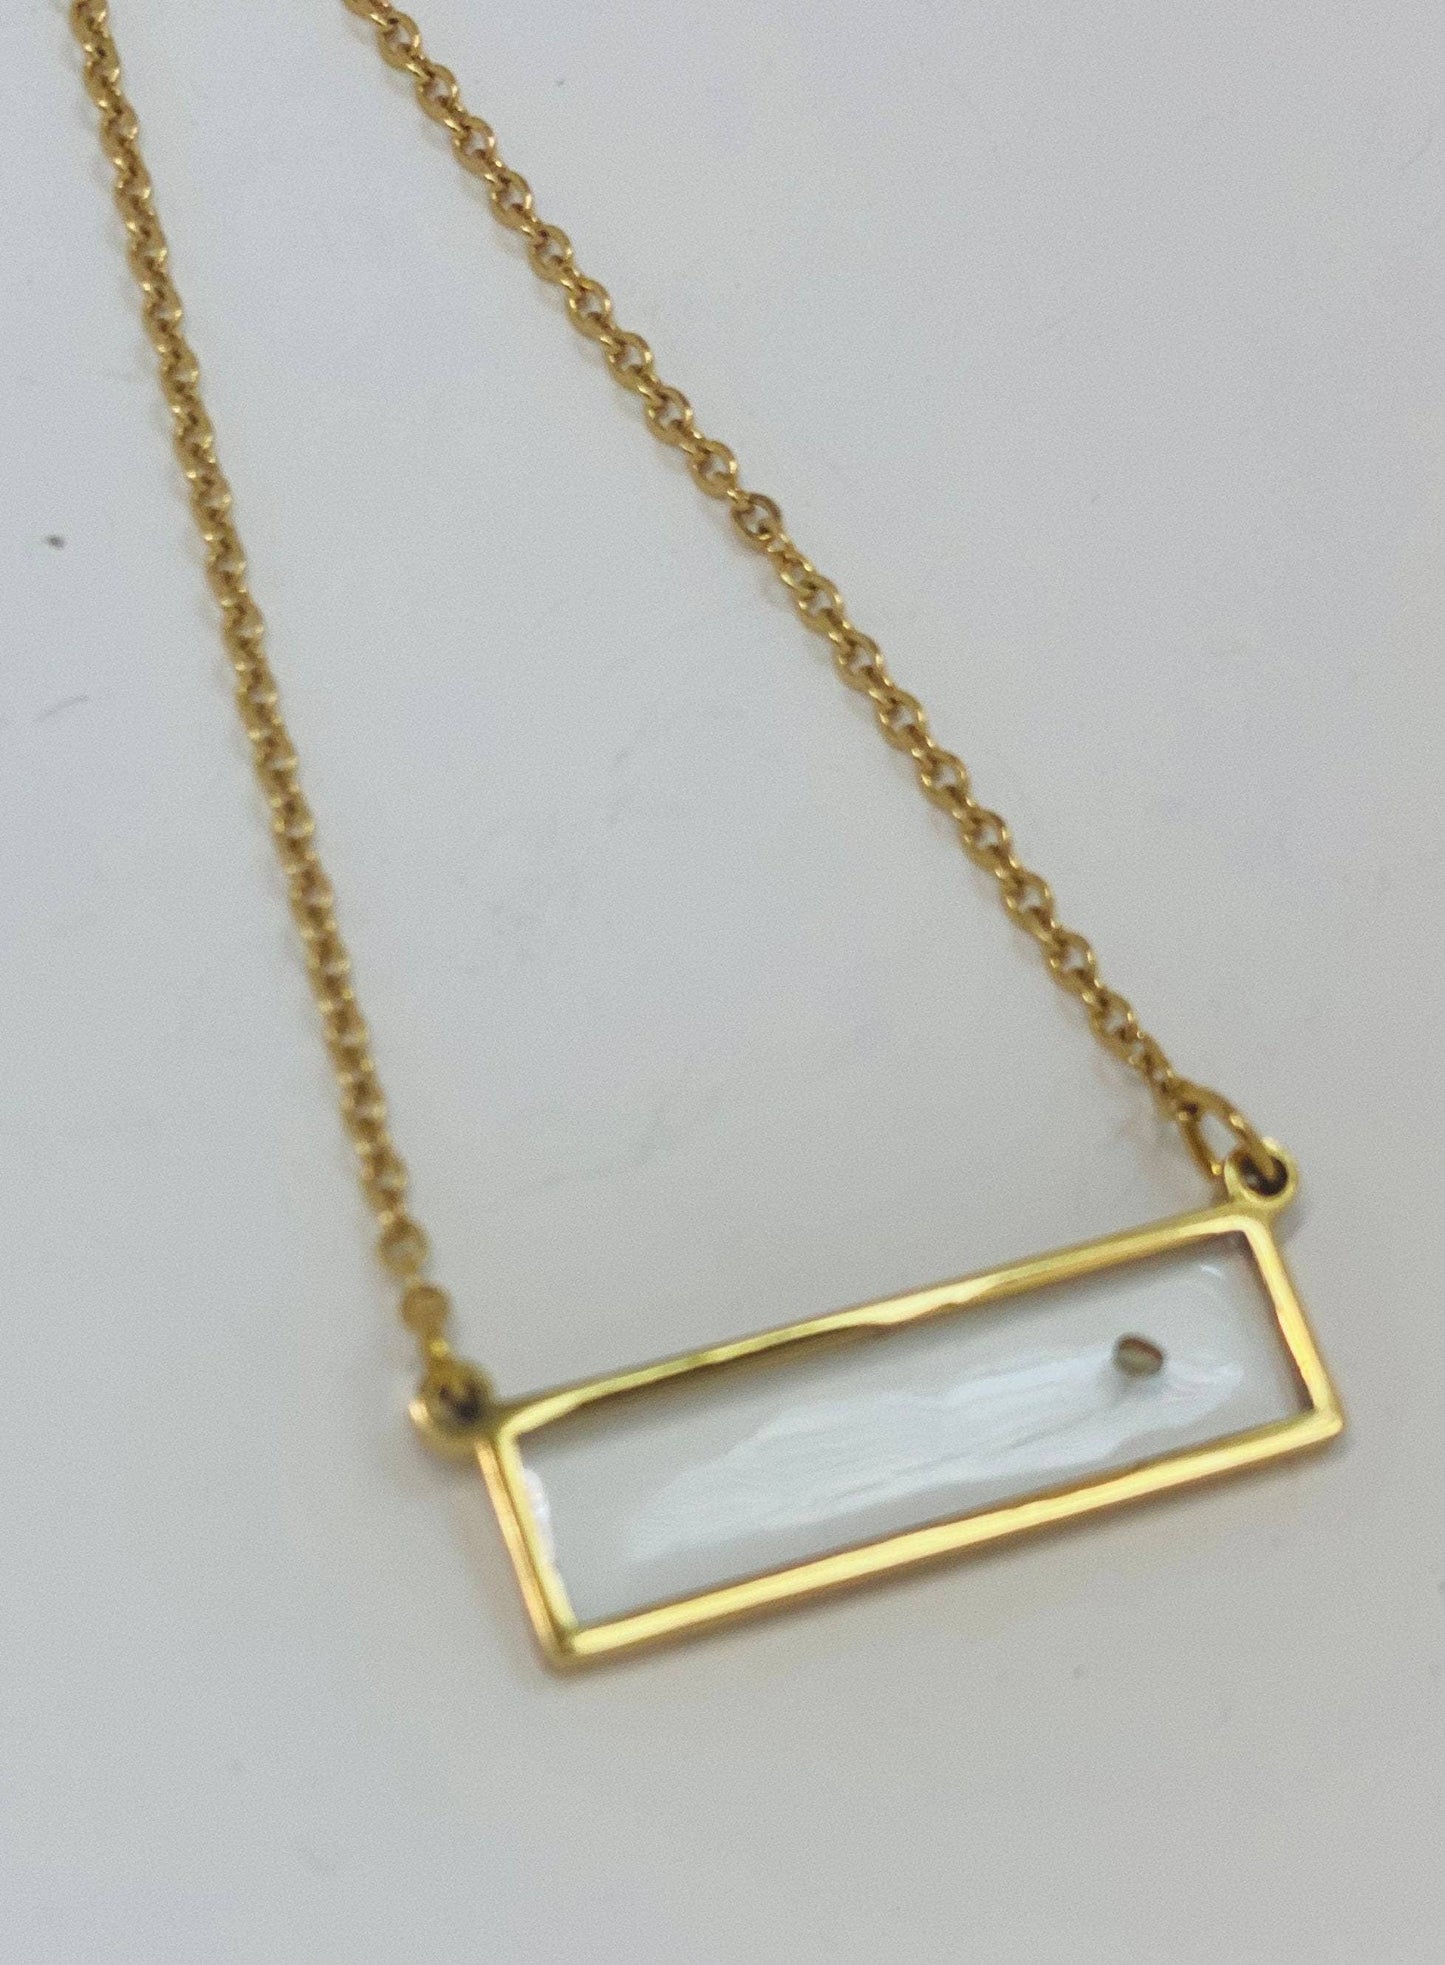 Mustard Seed Necklace